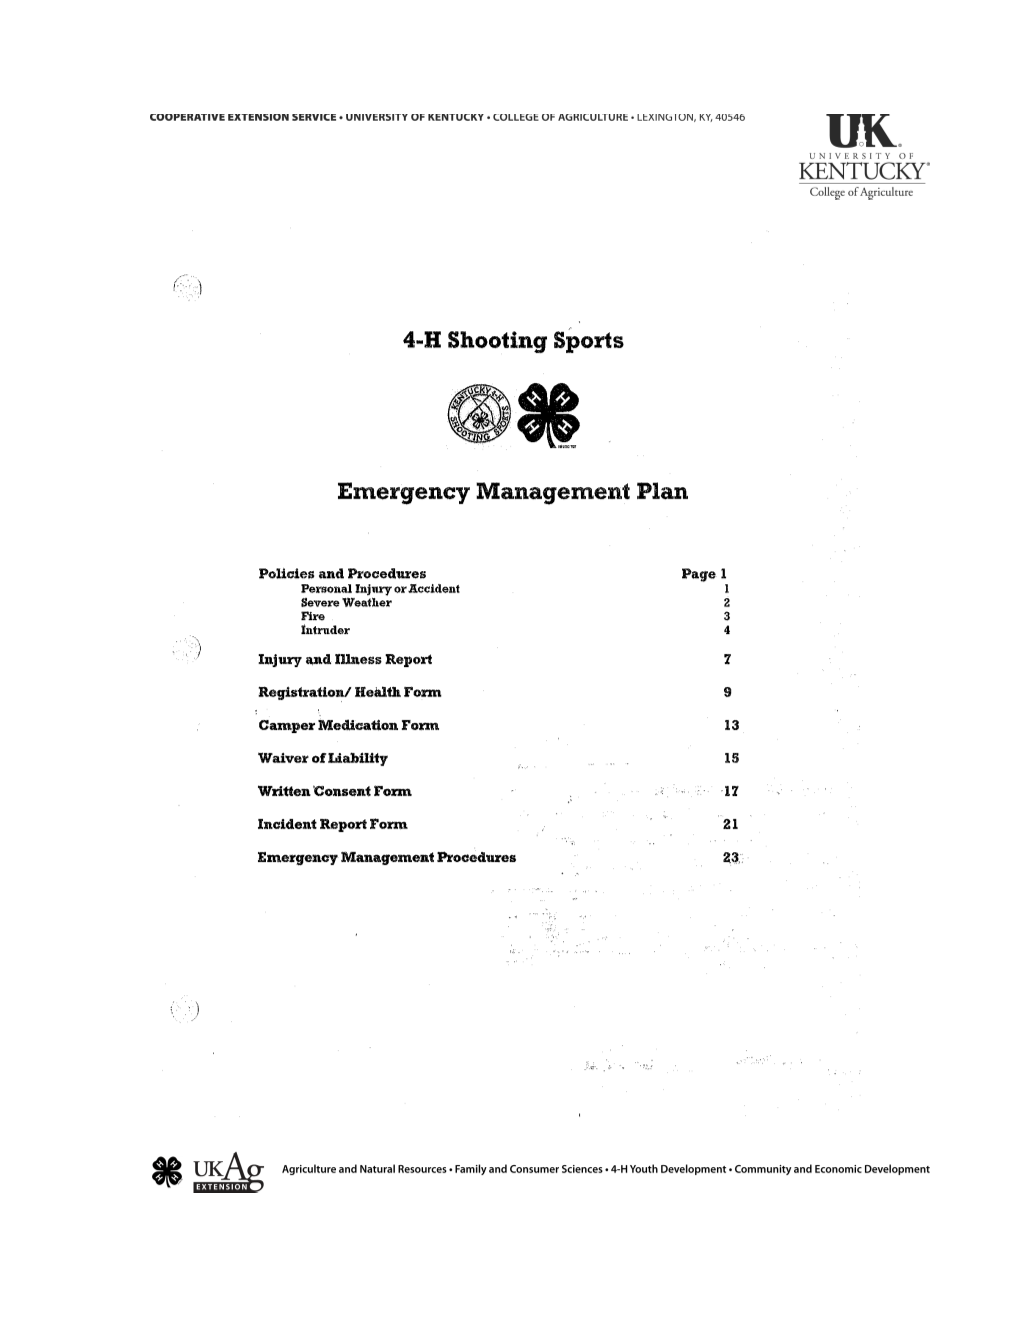 This Emergency Management Plan Has Been Developed for the 4-H Shooting Sports Education